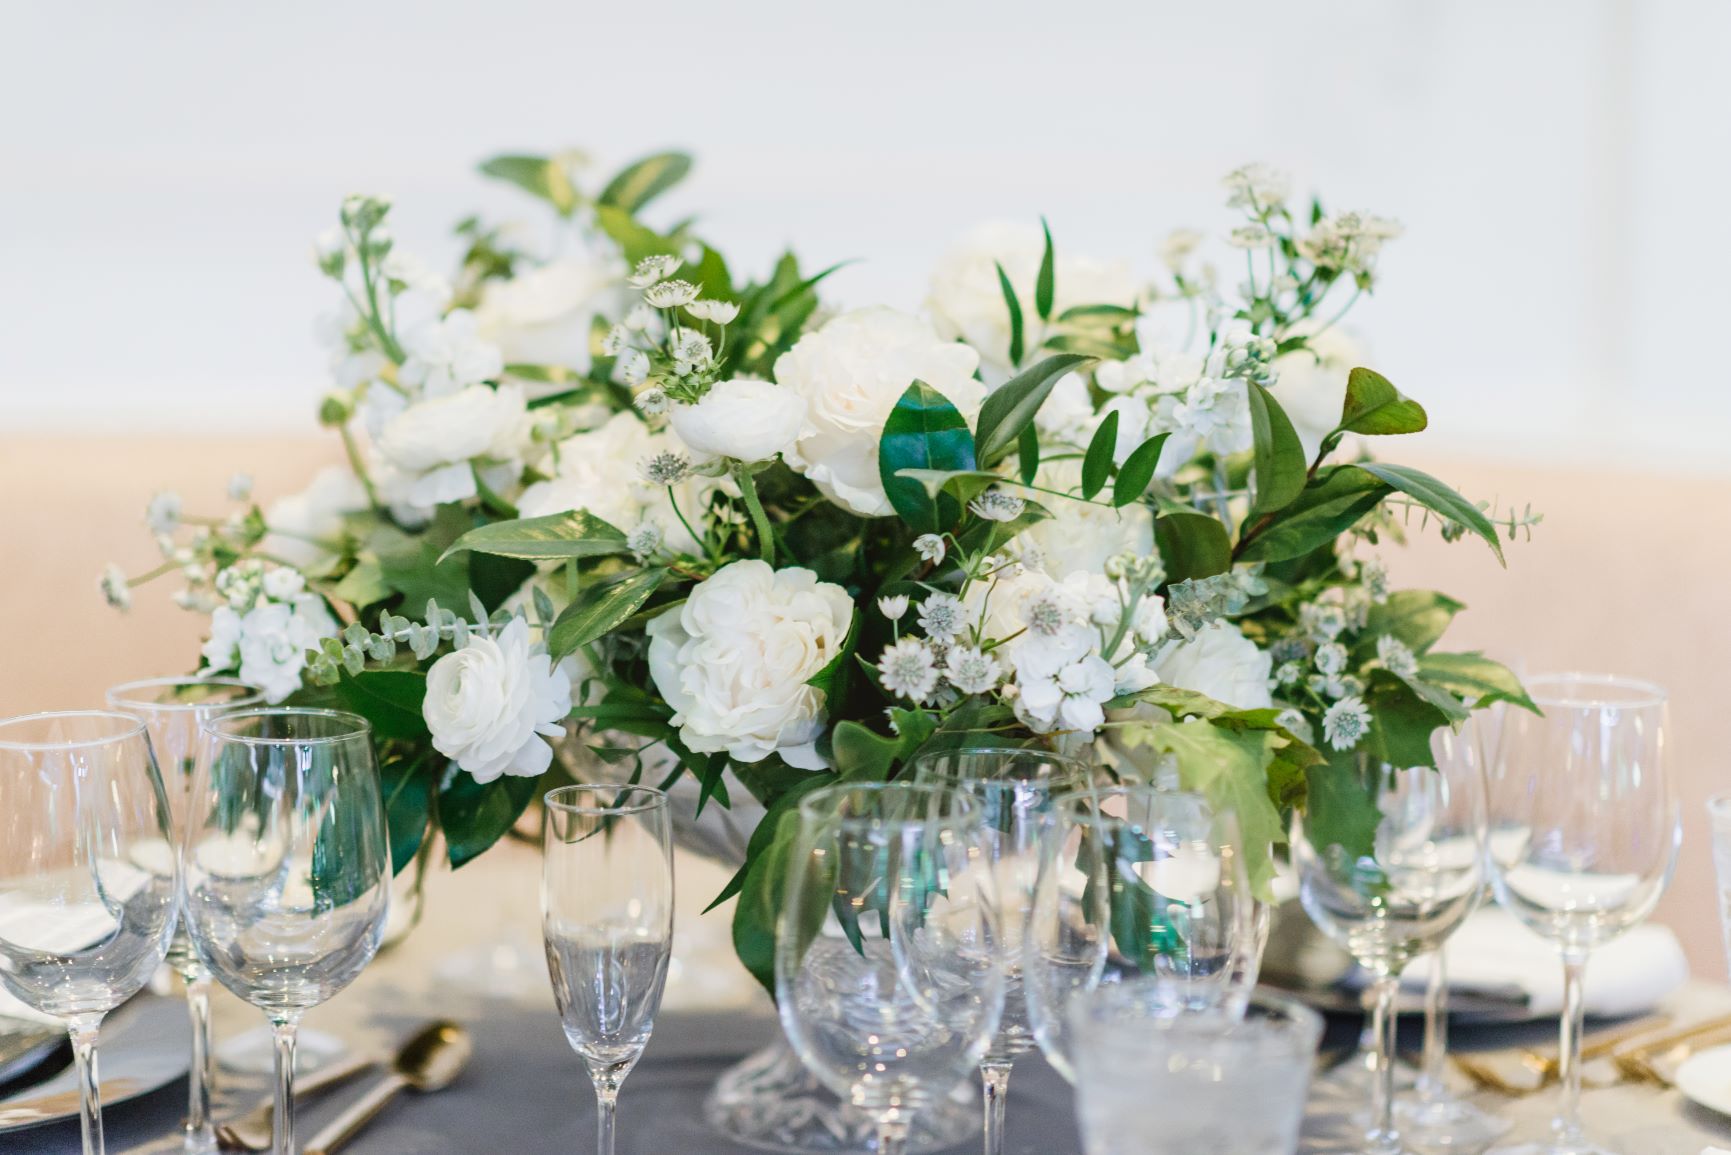 Centerpiece with white flowers